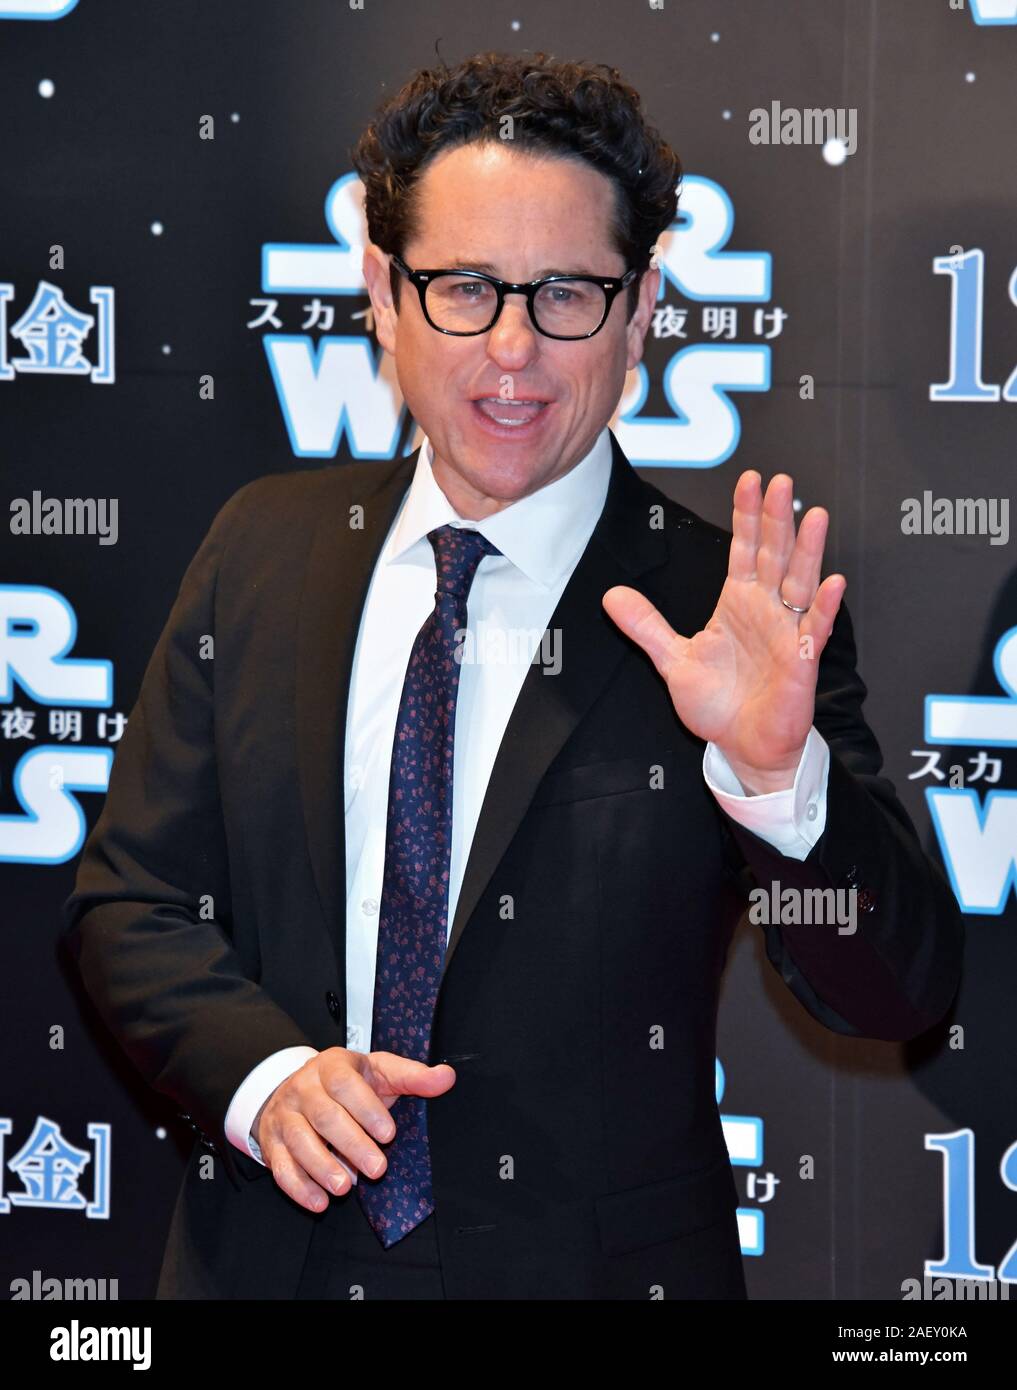 Tokyo, Japan. 11th Dec, 2019. Director J.J. Abrams attends the Japan premiere for the film 'Star Wars: The Rise of Skywalker' in Tokyo, Japan on Wednesday, December 11, 2019. This film will open on December 20th in the world. Prior to this, special screening will be held at Hokkaido, Tokyo, Aichi, Osaka and Fukuoka in Japan on December 19th. Photo by Keizo Mori/UPI Credit: UPI/Alamy Live News Stock Photo